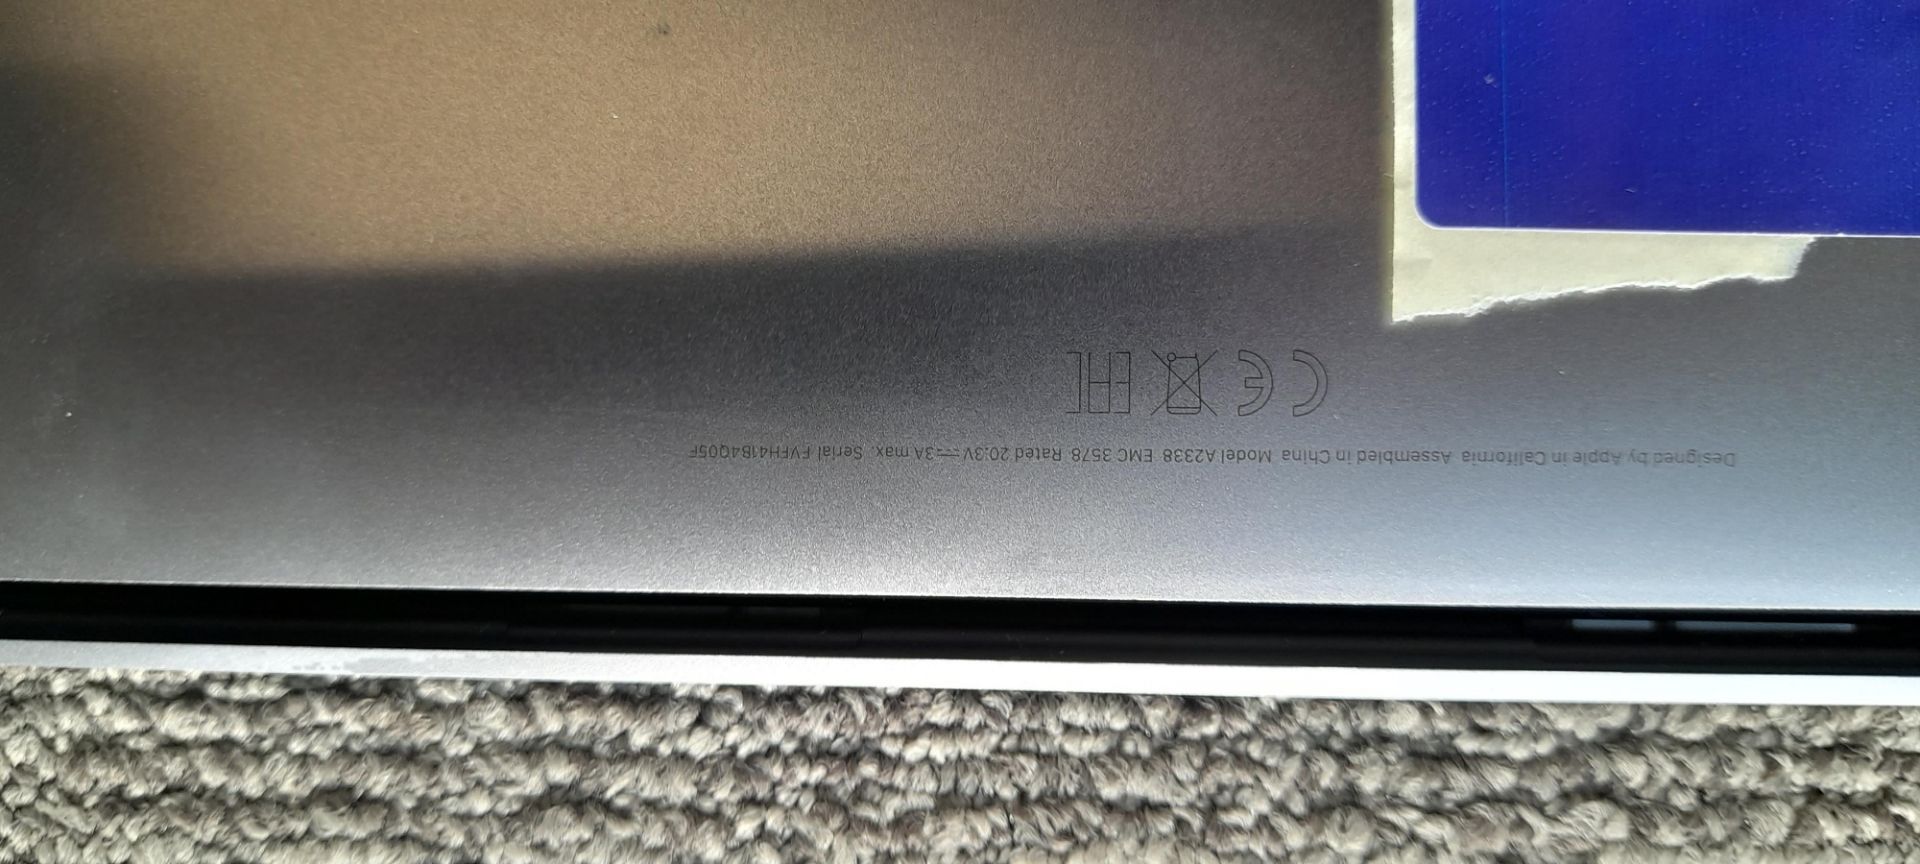 MacBook Pro 13", M1, A2338 EMC 3578, S/N: FVFH41B4Q05F - Screen not working – In recovery mode - Image 3 of 4